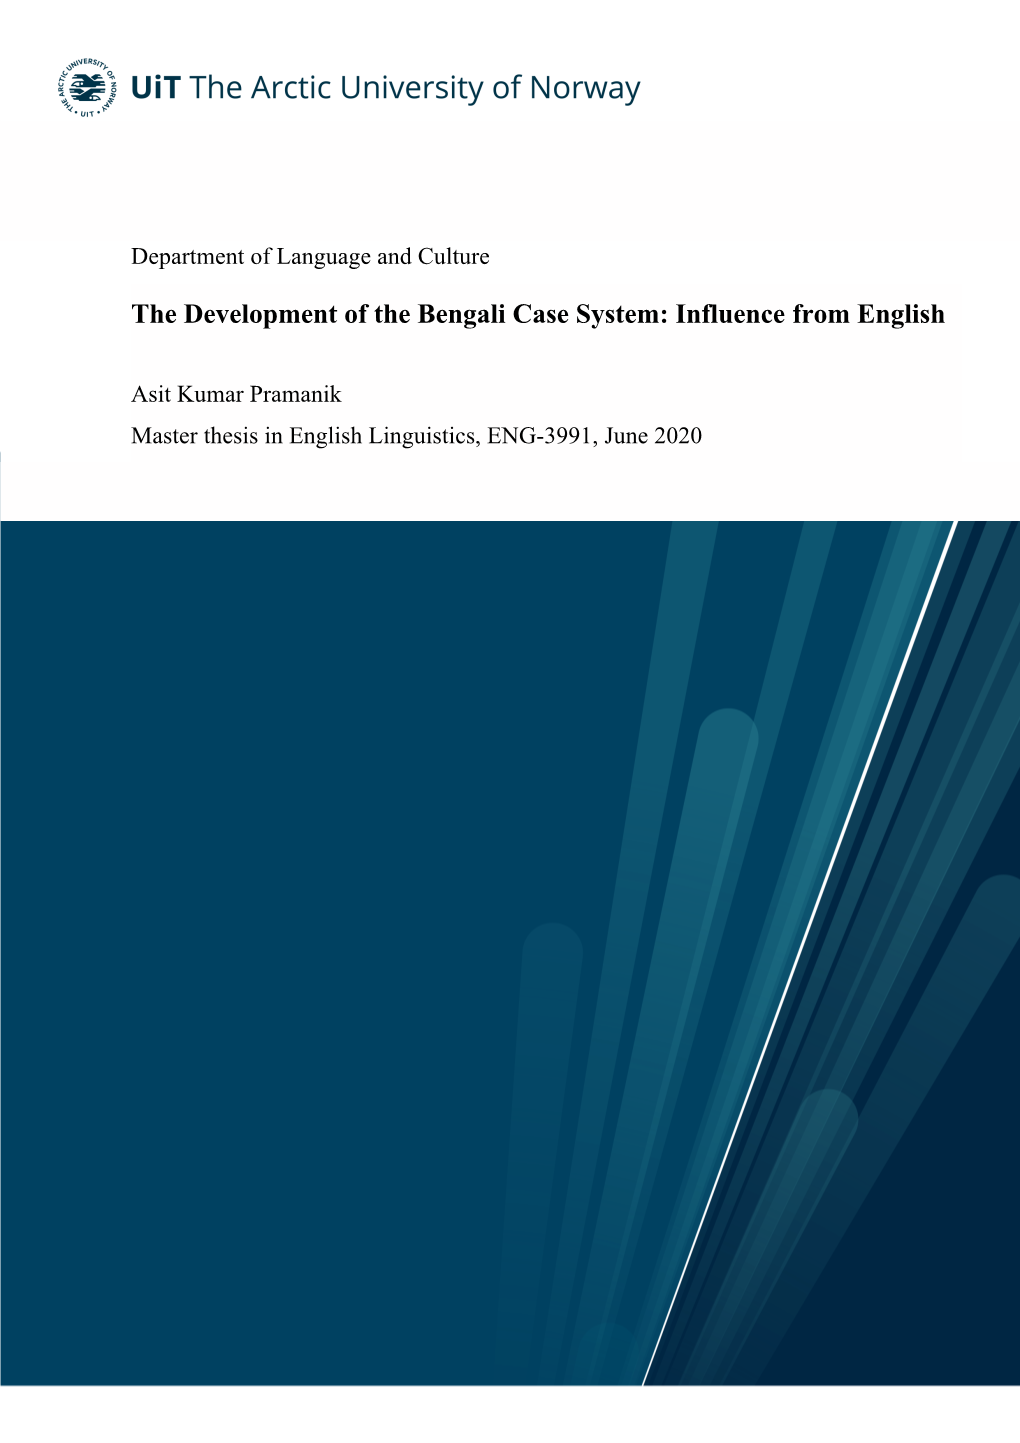 The Development of the Bengali Case System: Influence from English